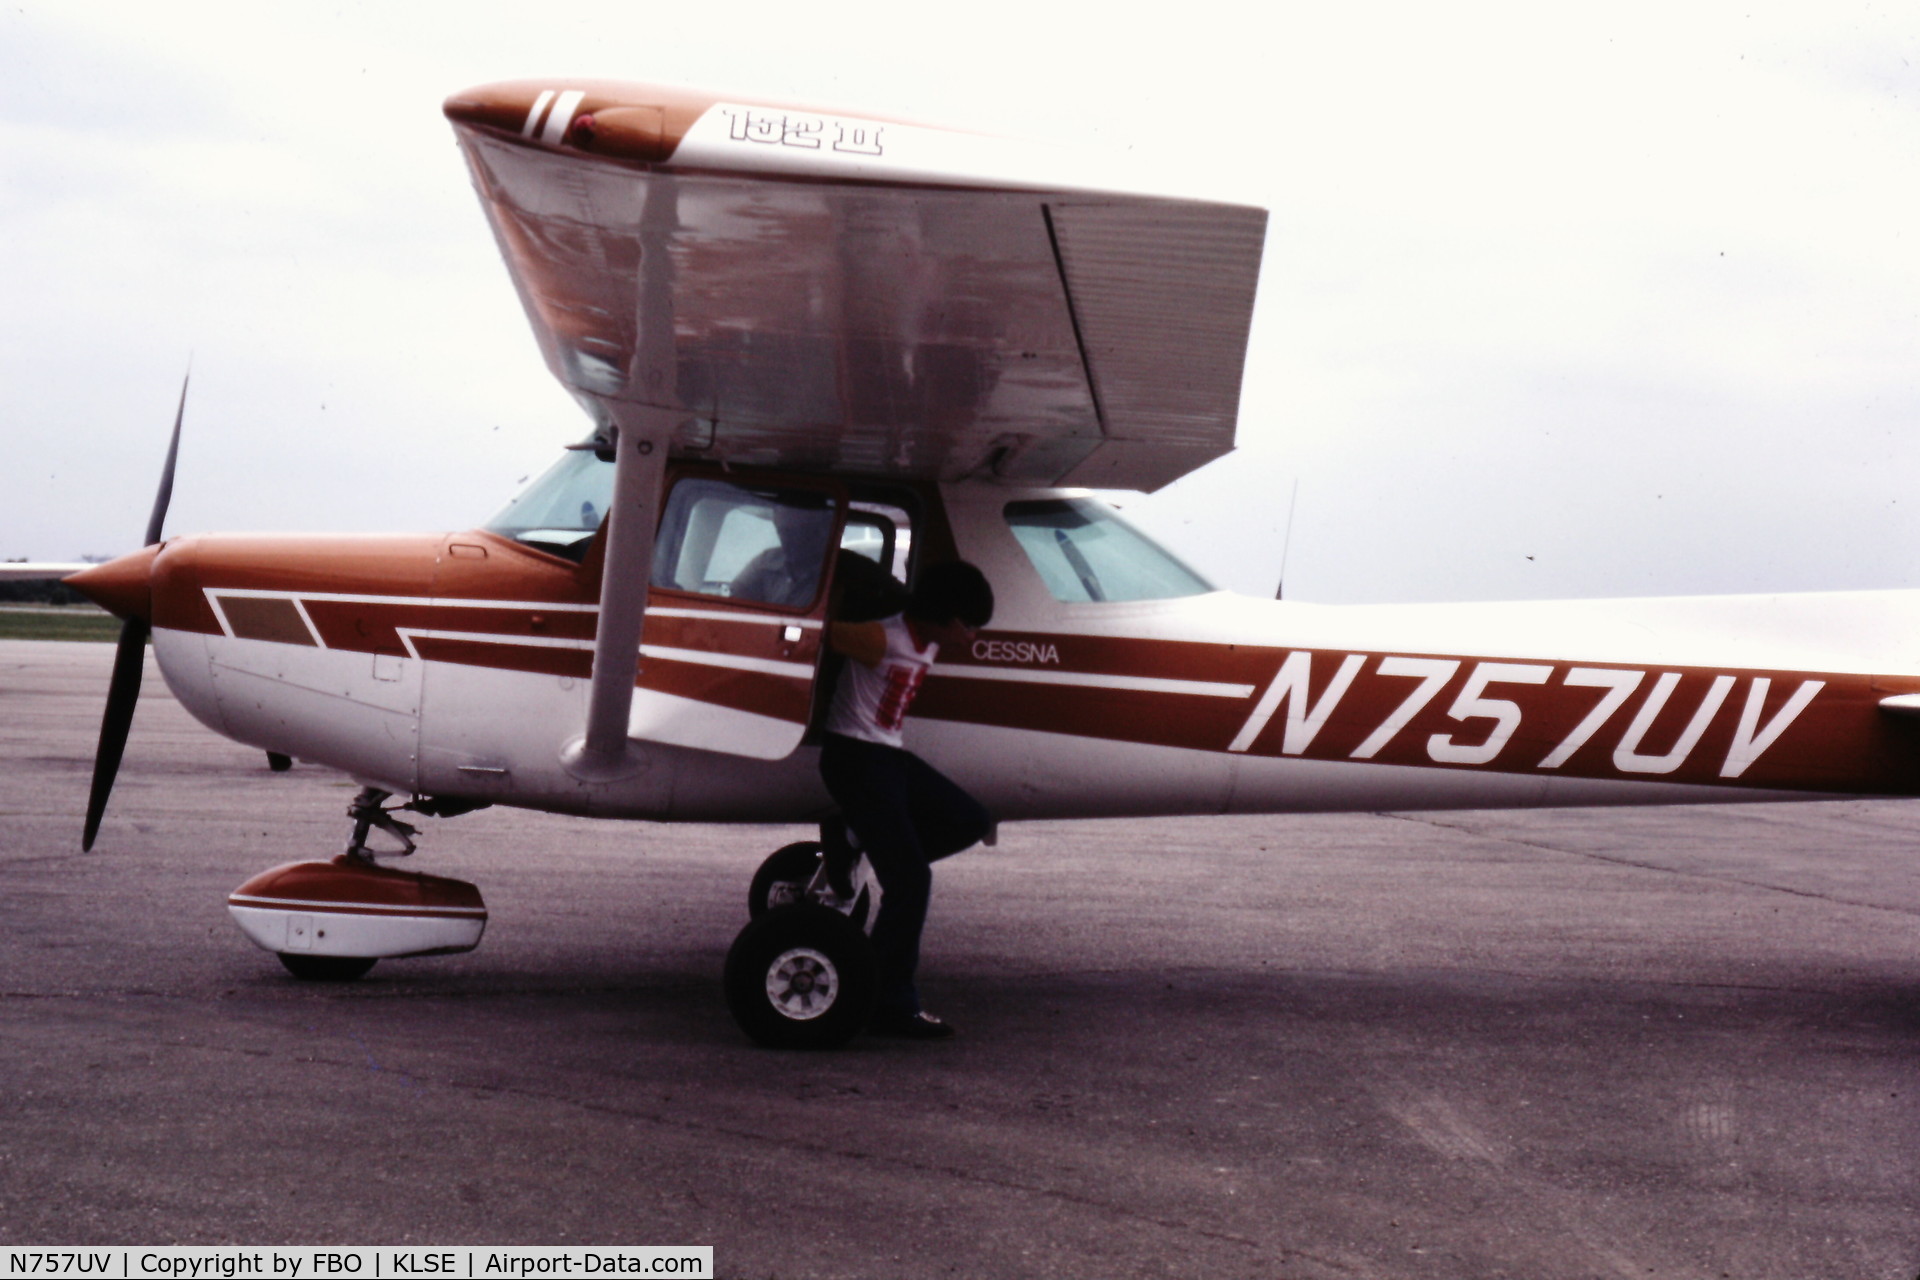 N757UV, 1977 Cessna 152 C/N 15280022, Pic of the aircraft back in the late 70's when I took my first intro flight!